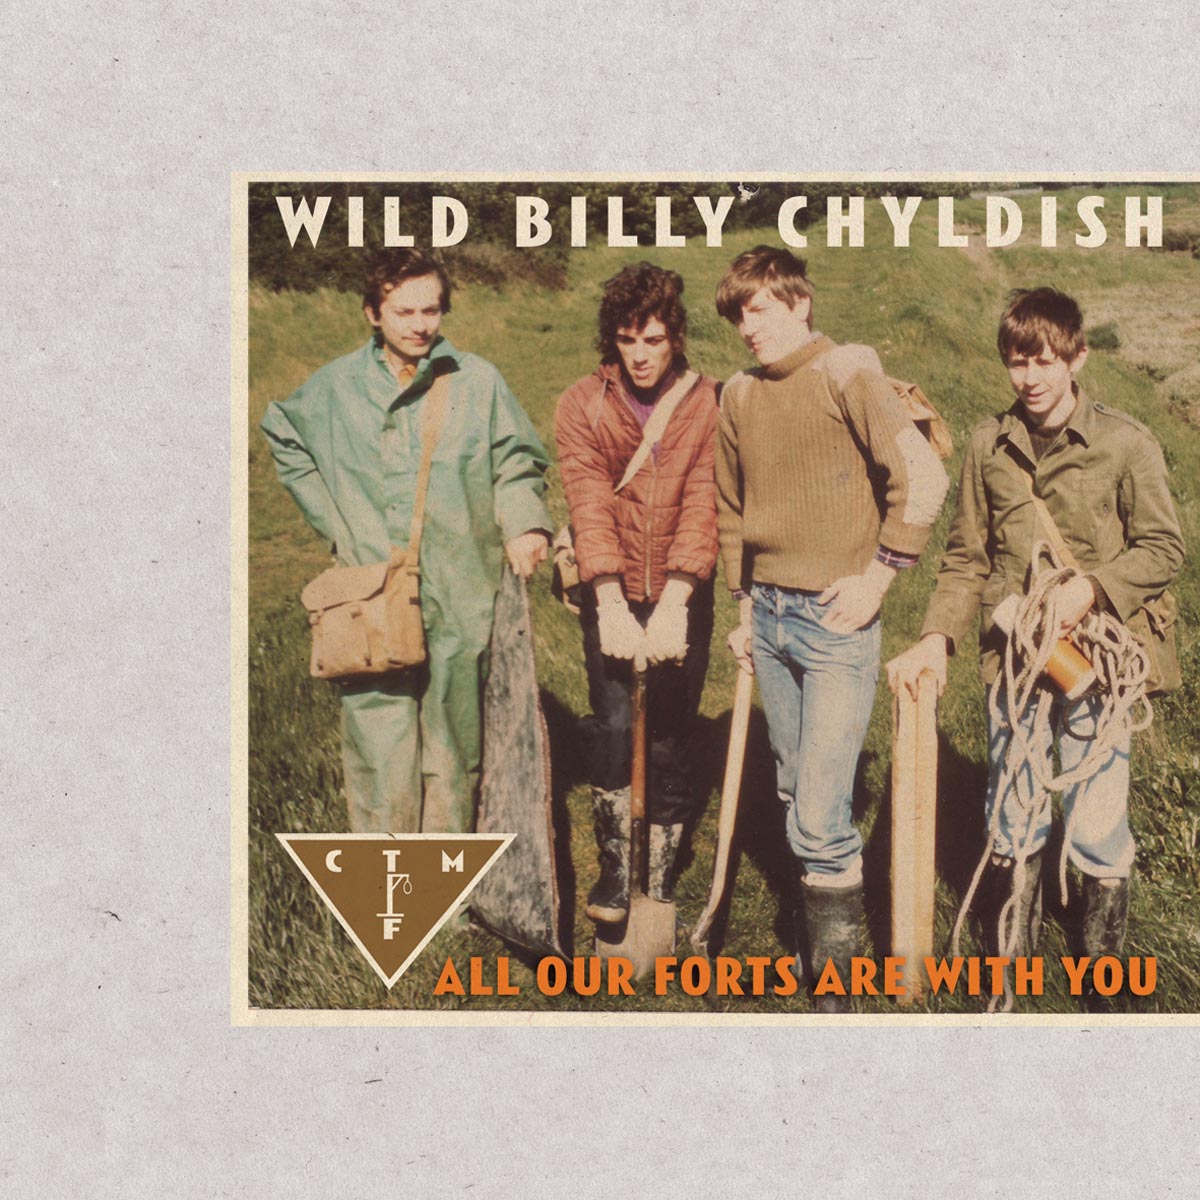 Wild Billy Childish & CTMF - All Our Forts Are With You - LP